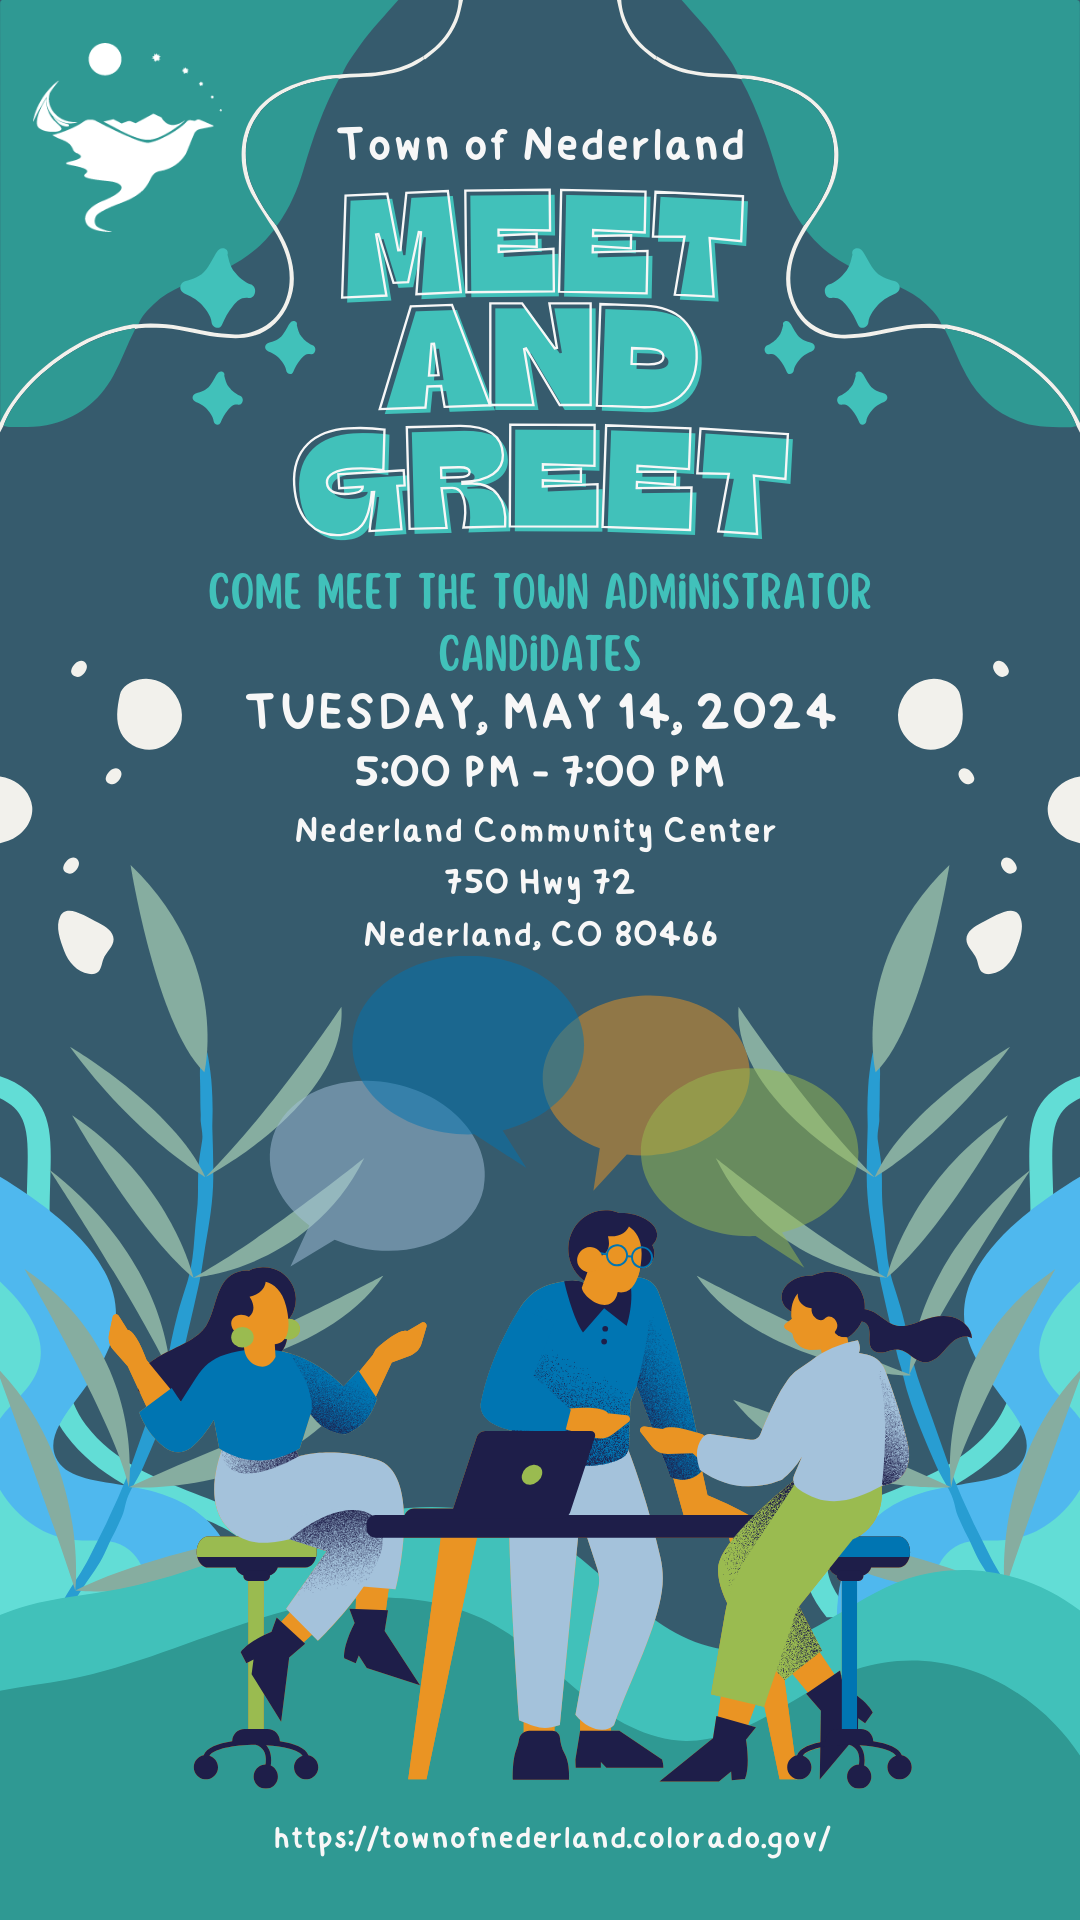 Town of Nederland Meet & Greet - Come meeting the Town Administrator Candidates! Tuesday, May 14, 2024. 5pm - 7pm at the Nederland Community Center